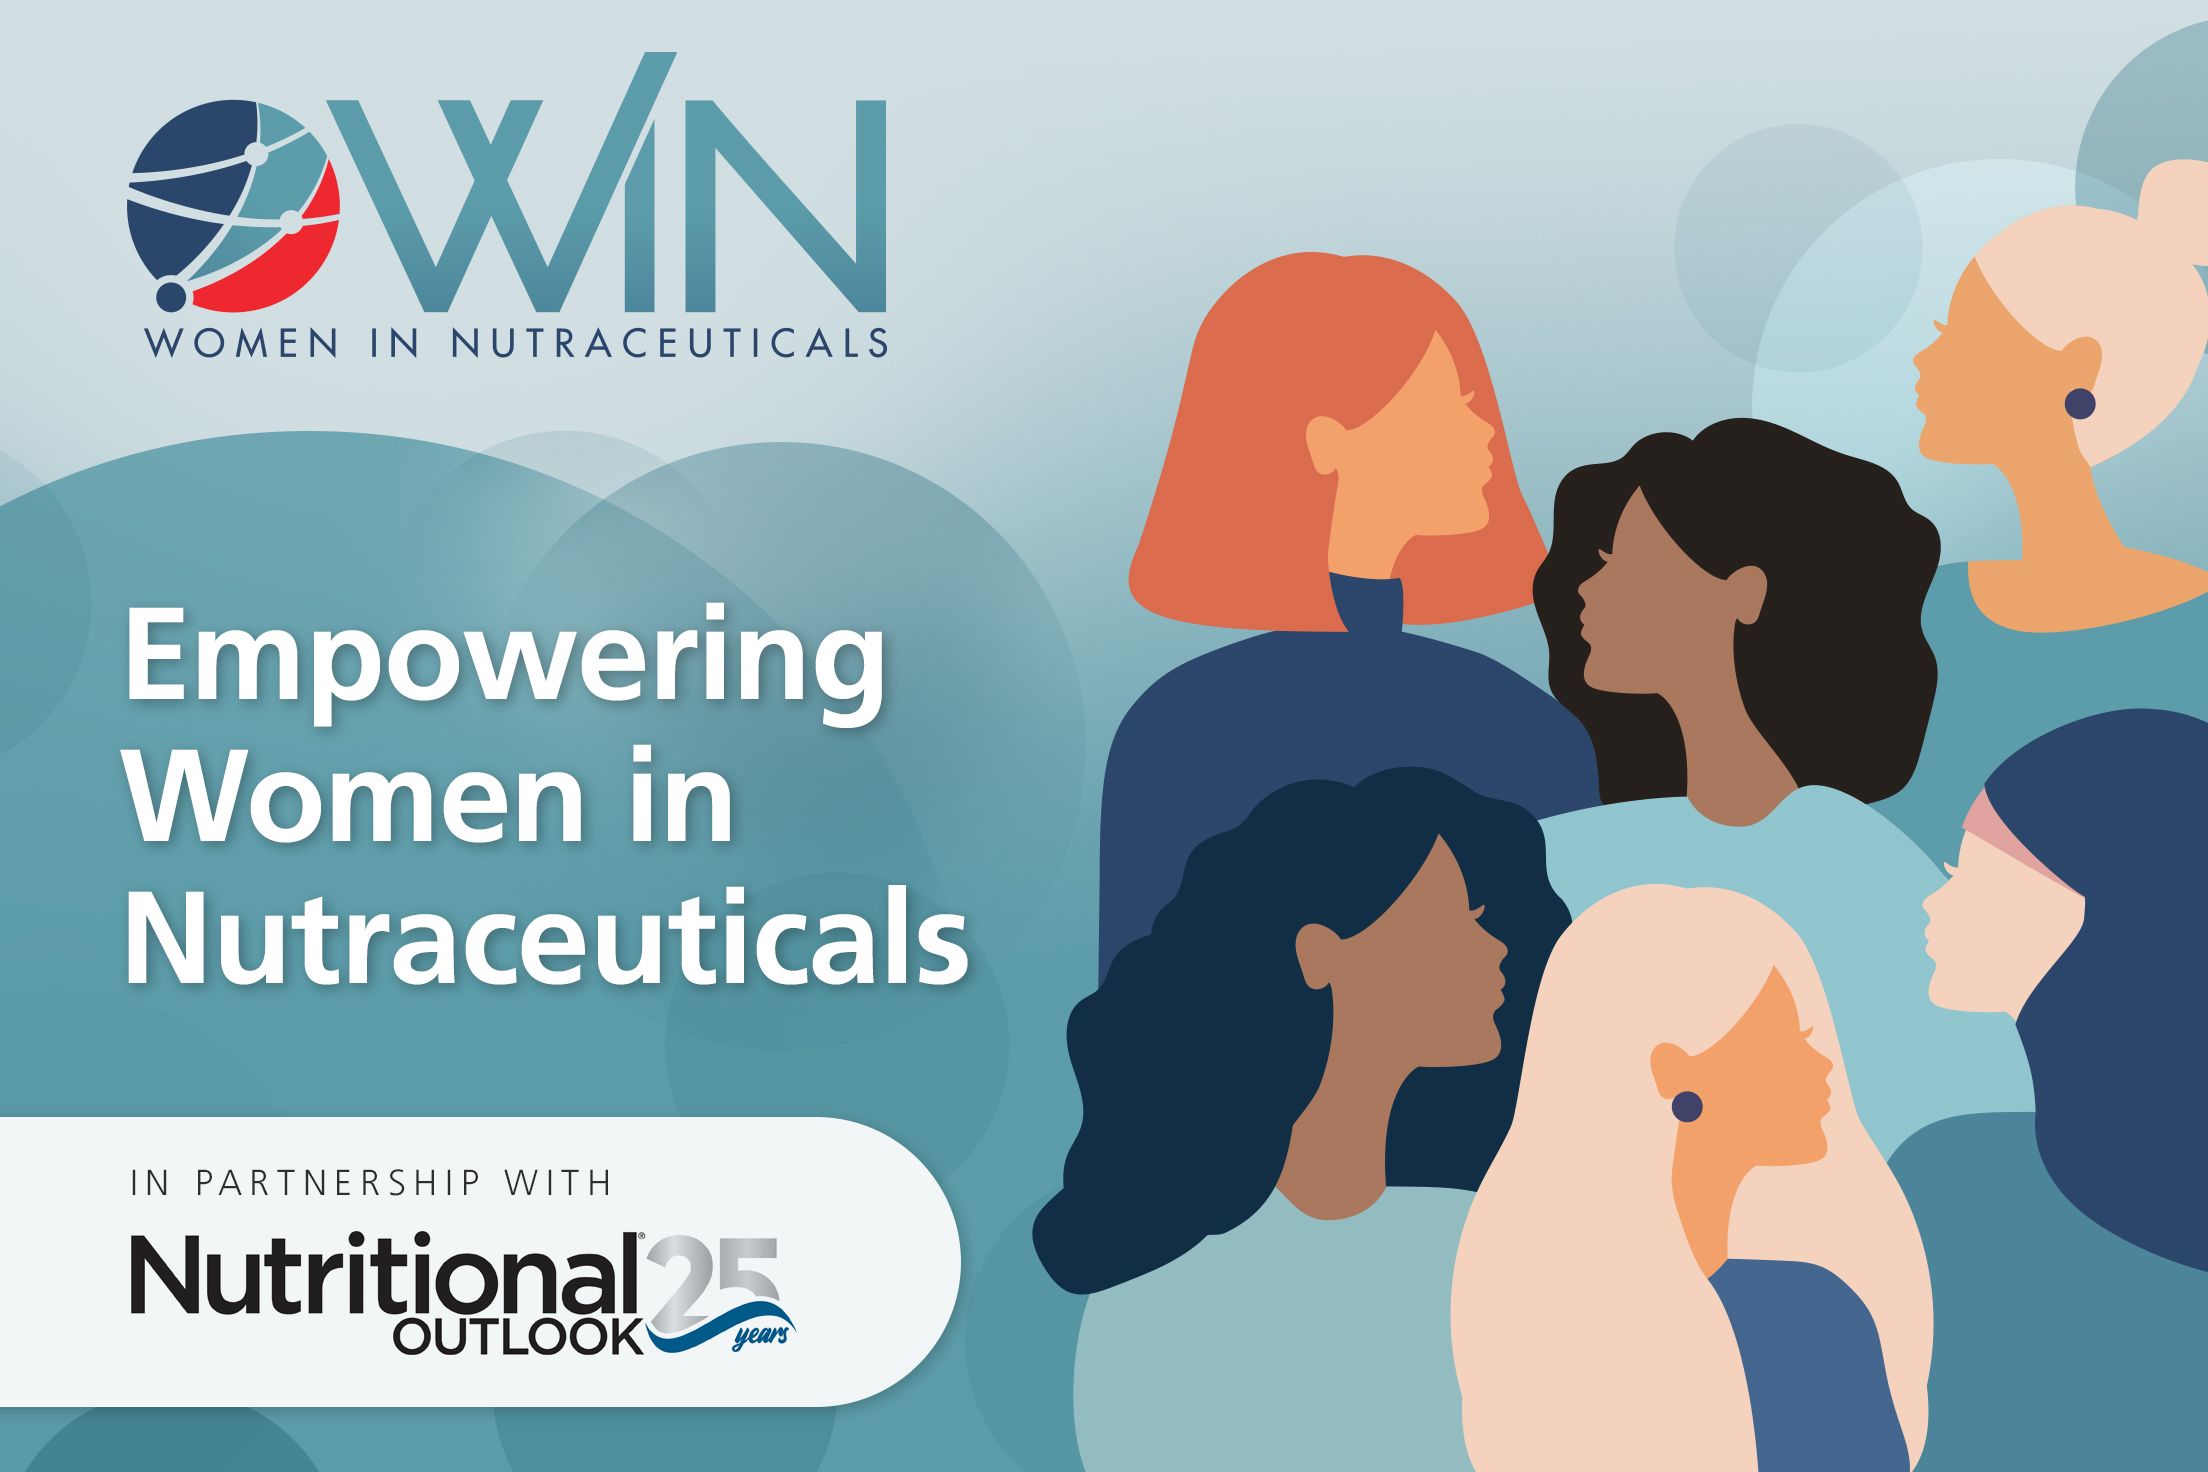 New nonprofit Women In Nutraceuticals aims to increase female representation in nutraceuticals industry and research